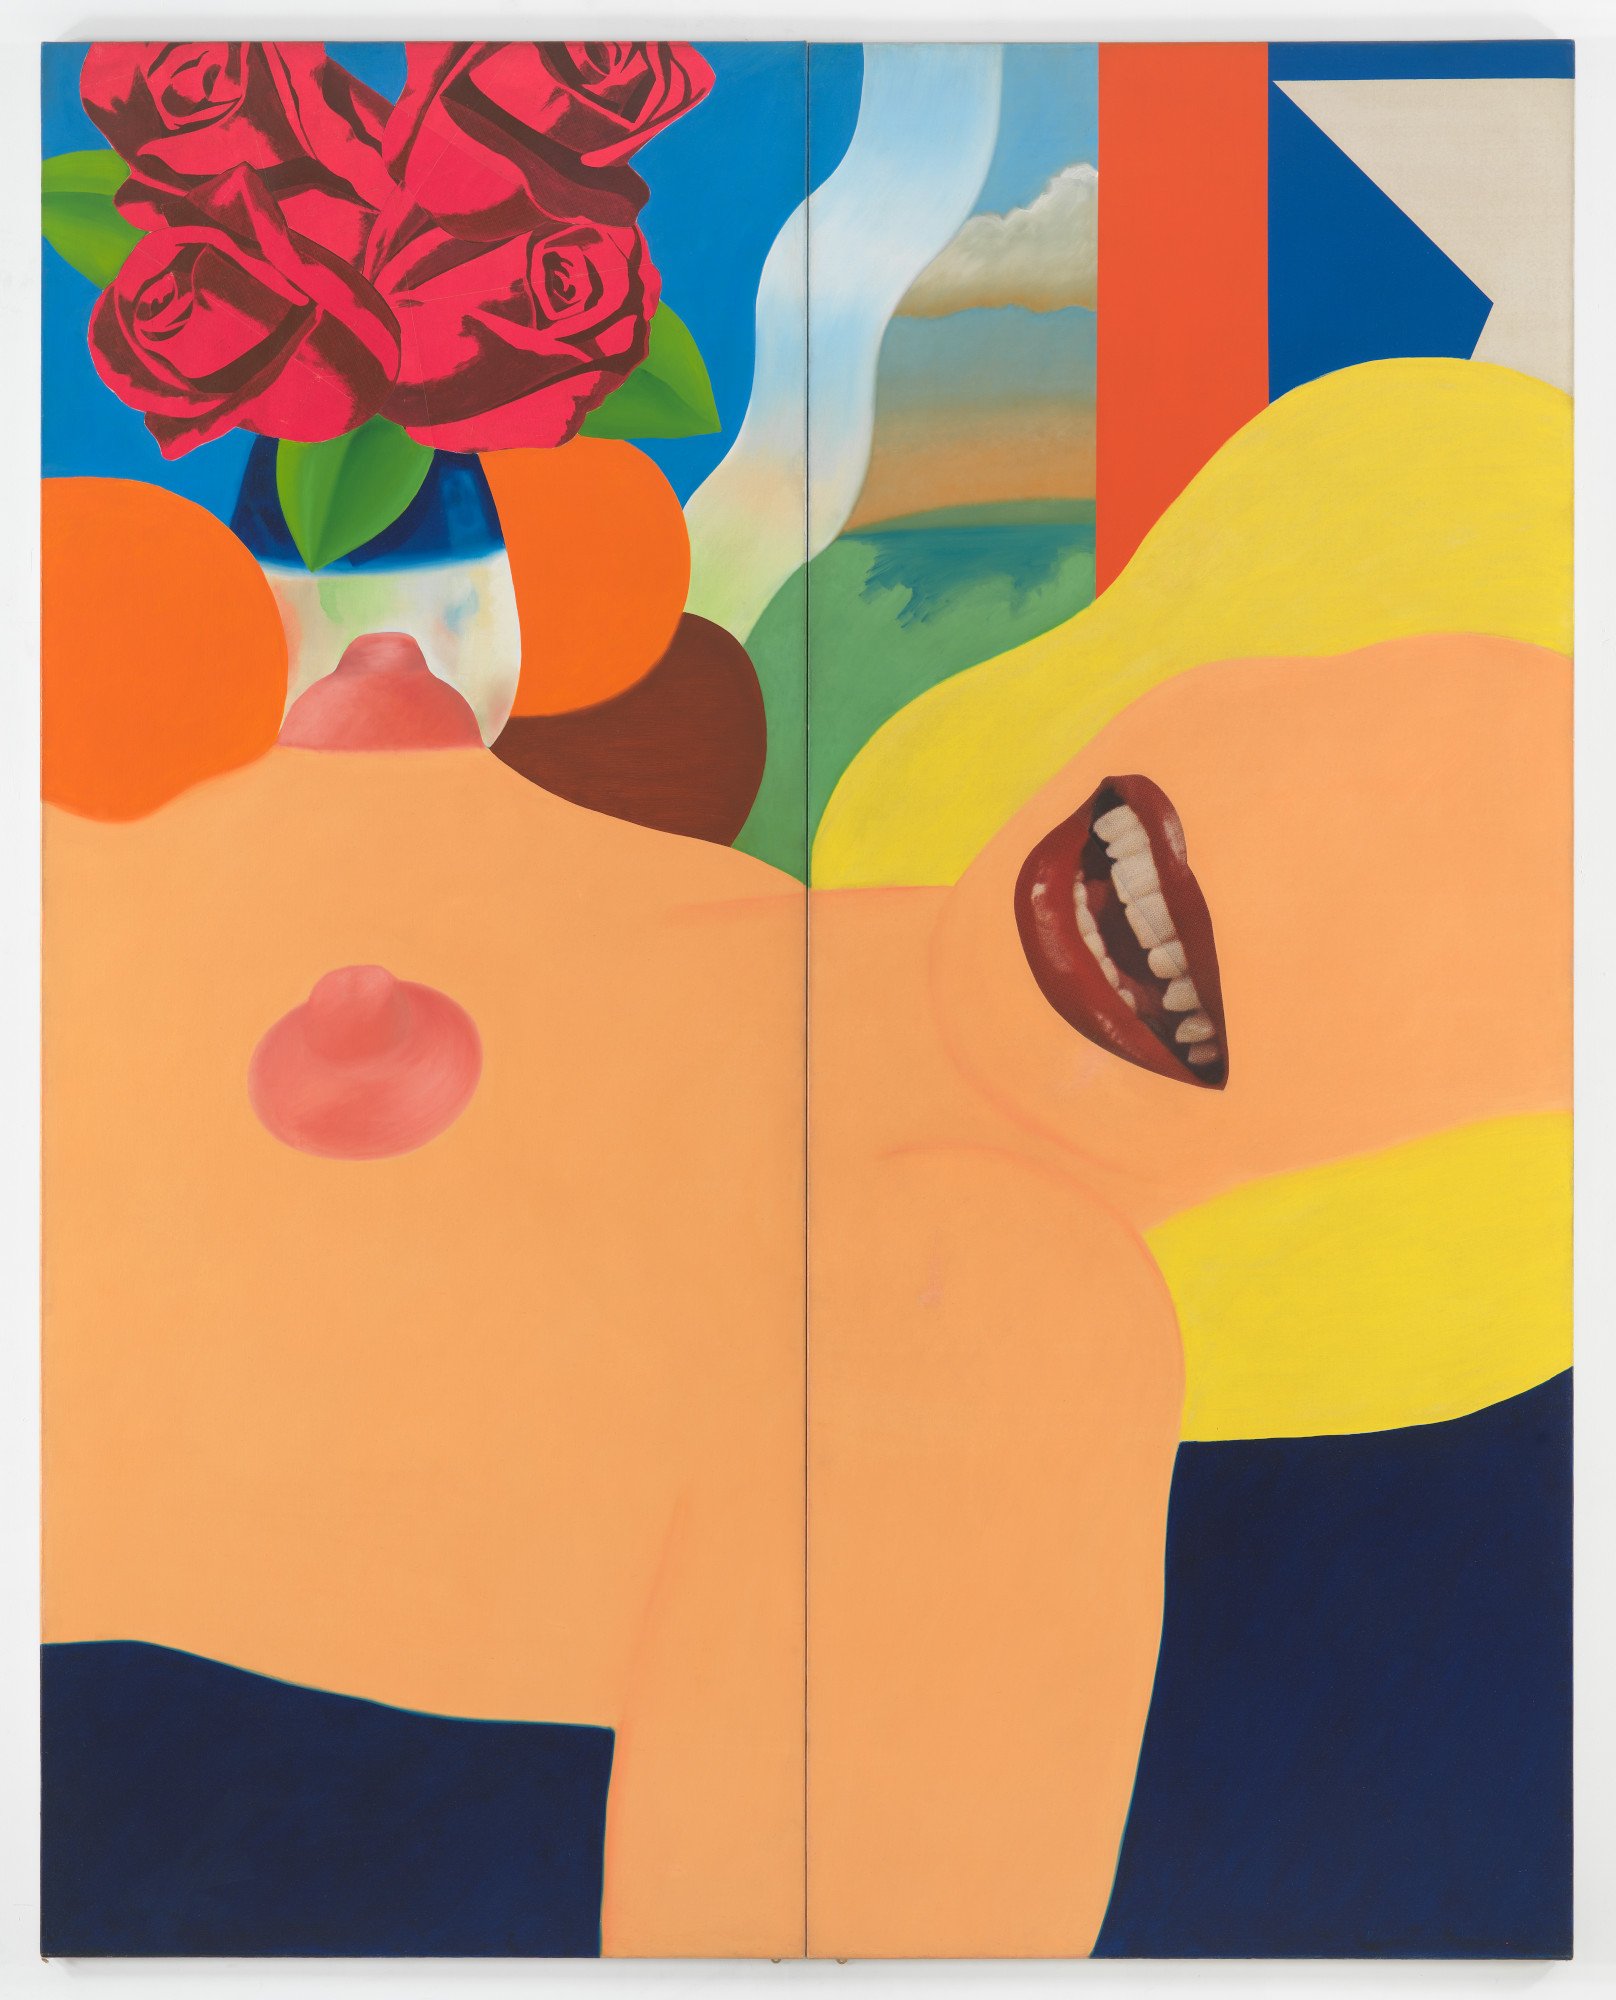  © The Estate of Tom Wesselmann/Licensed by ARS/VAGA, New York, Photo: Jeffrey Sturges, Courtesy the Estate and Gagosian 